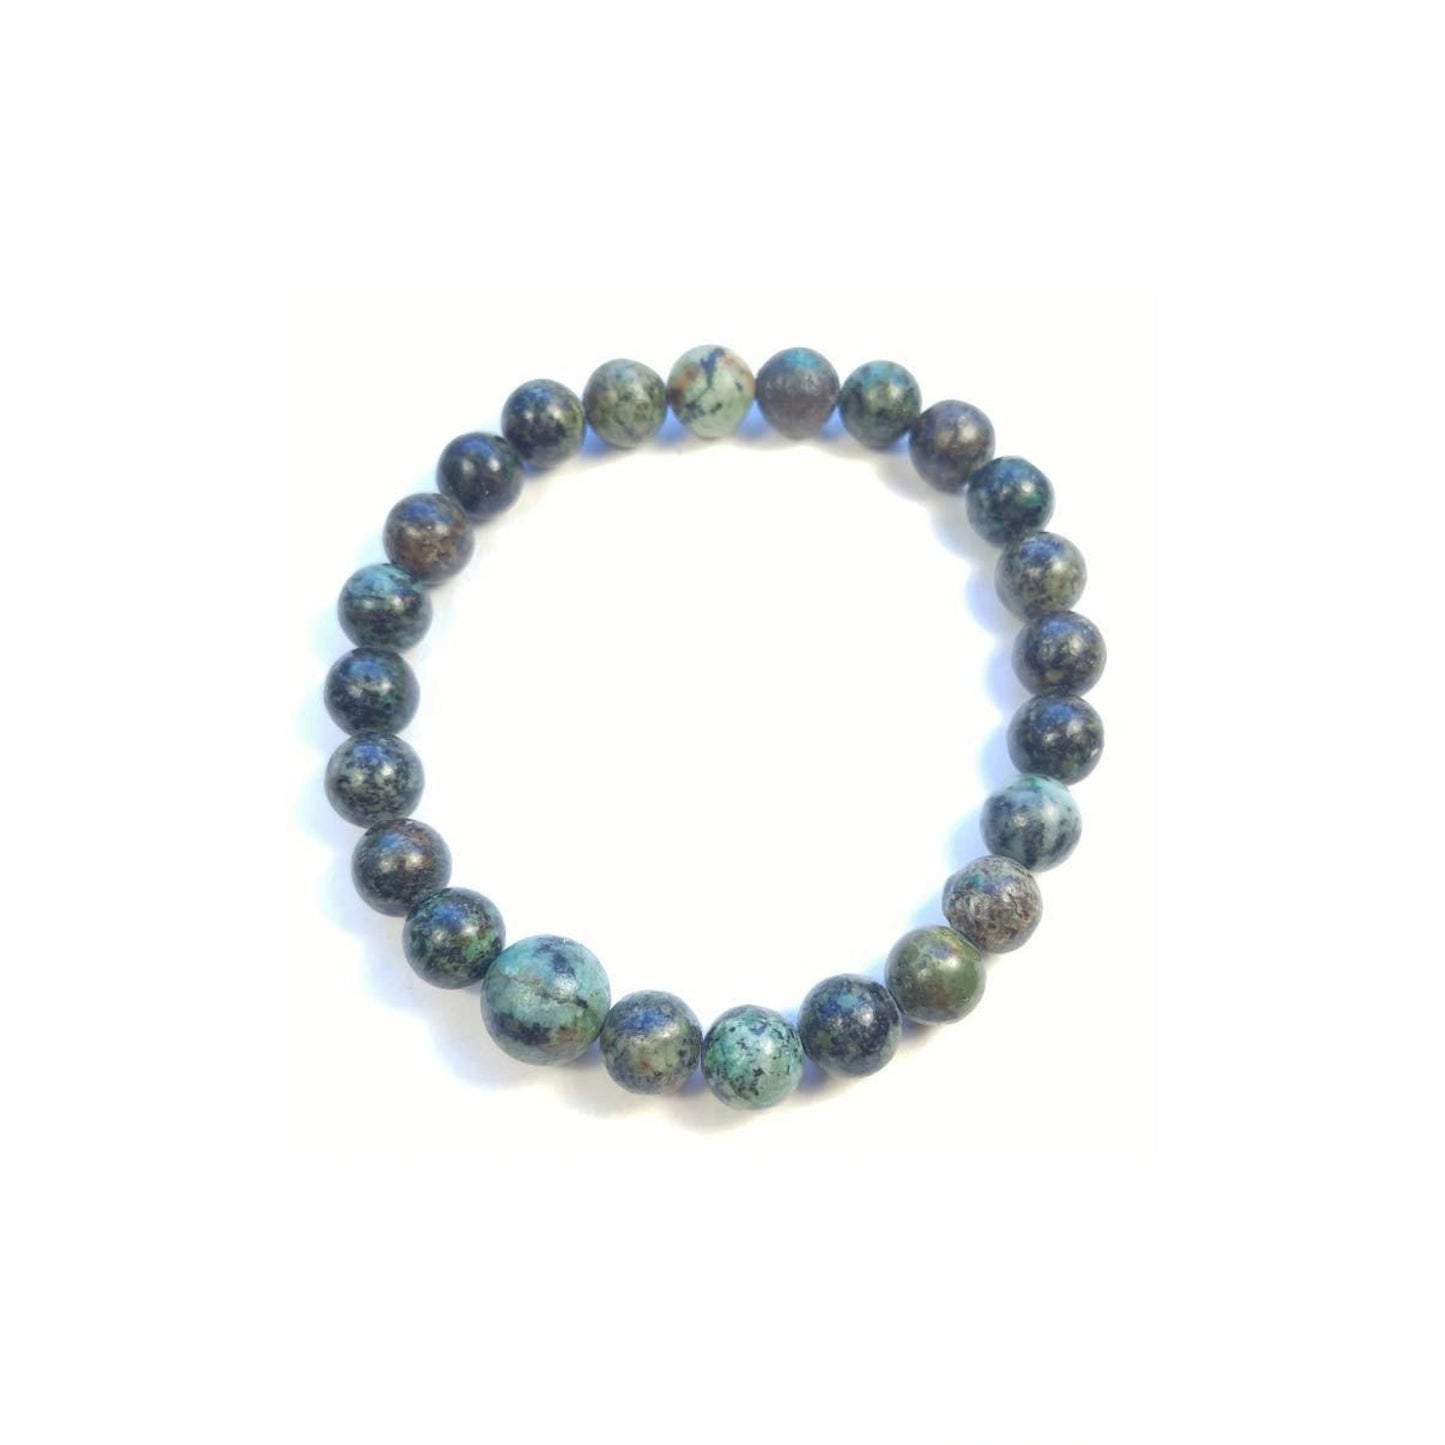 African Turquoise Stretchy Beaded Bracelet - Wrist Mala 8mm (2 Pack)